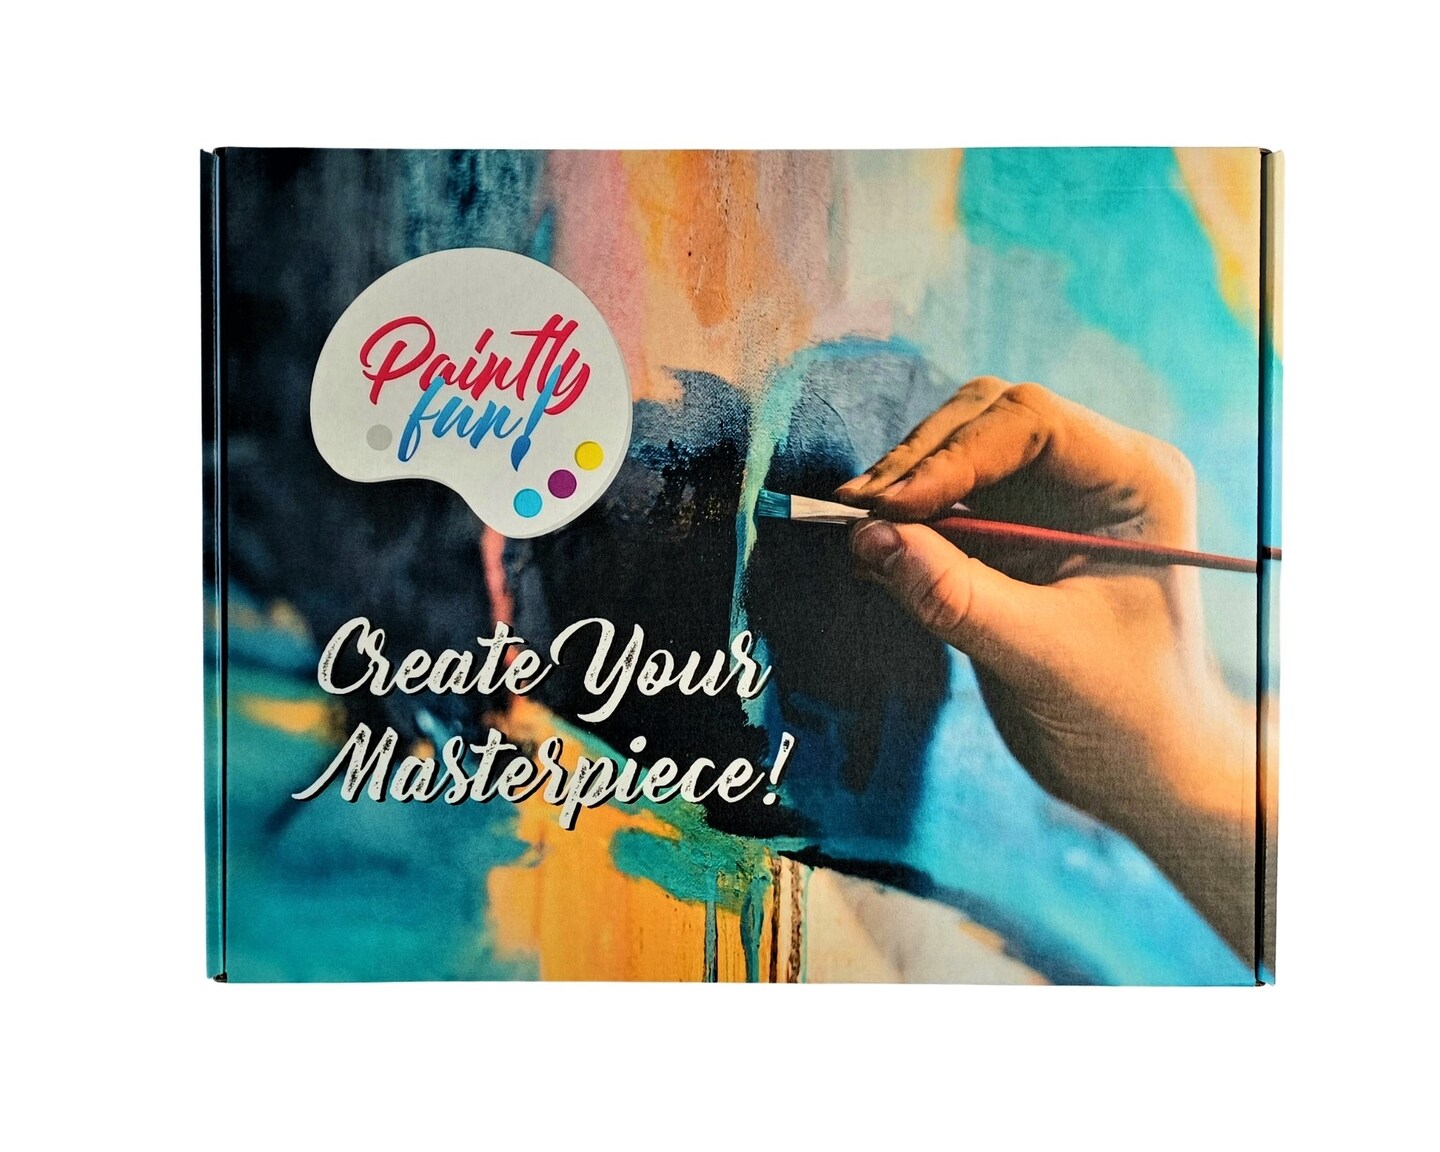 Paint and sip DIY craft kit, paint by numbers, paint night party – My-Whys